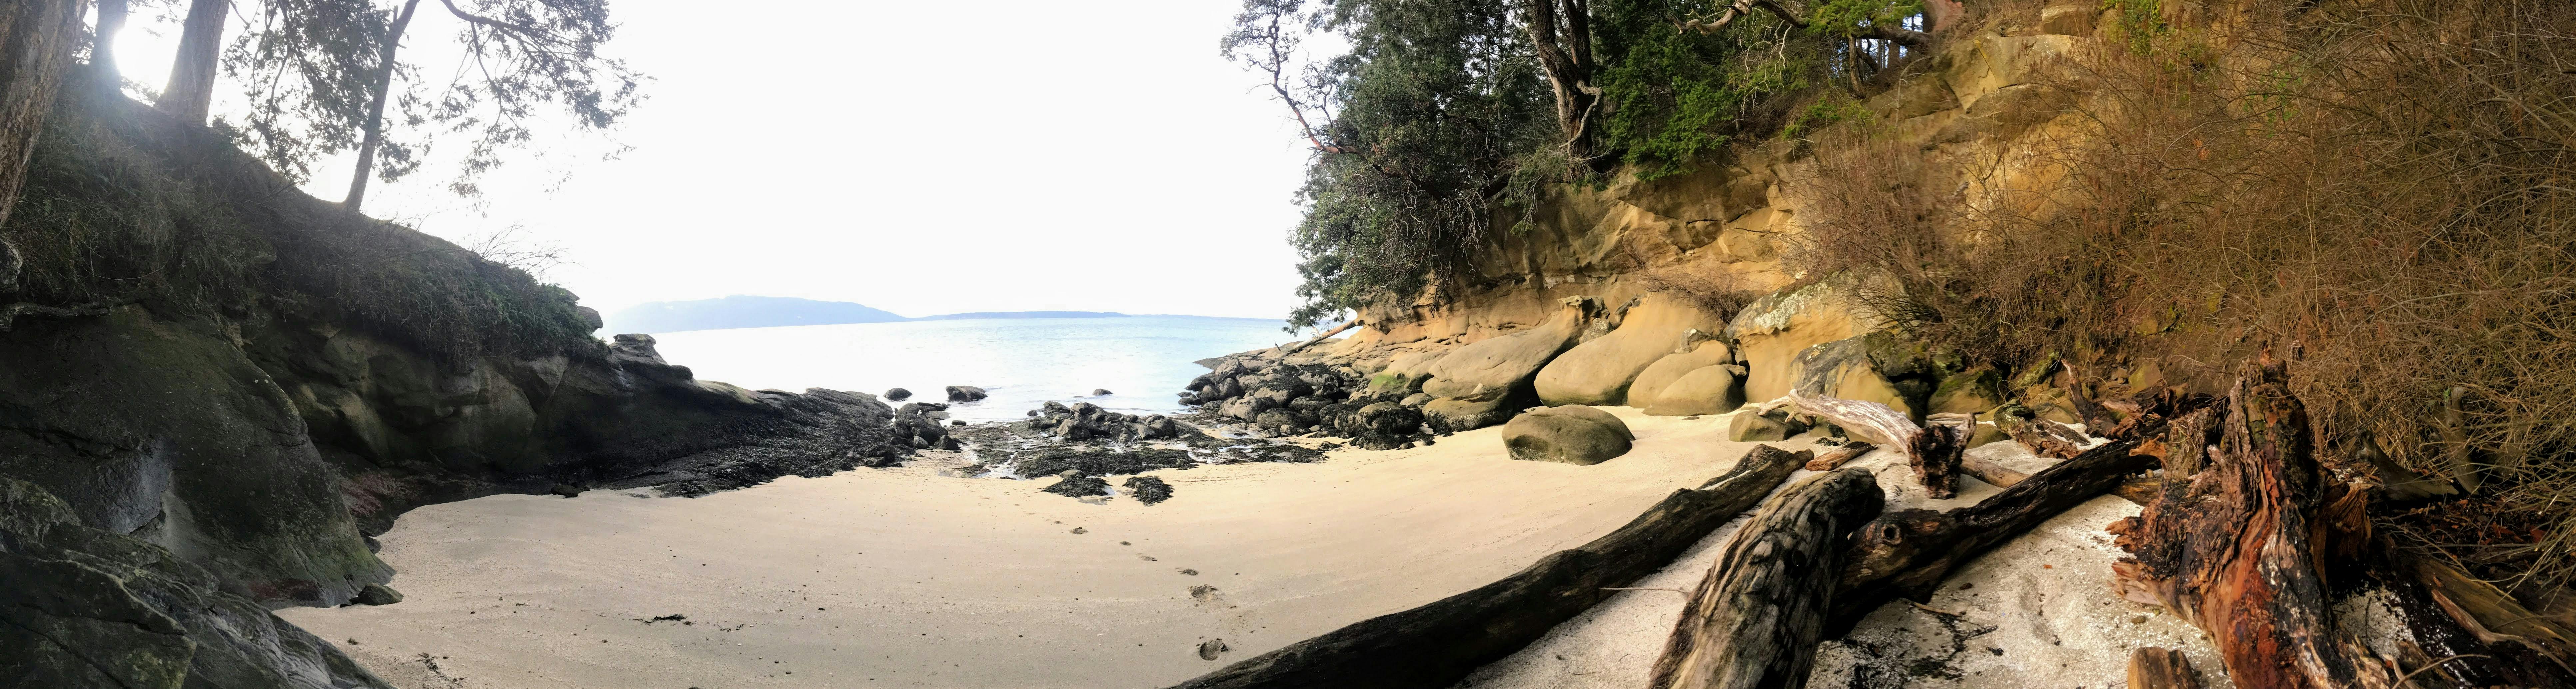 A sandy beach cove with rocks and driftwood